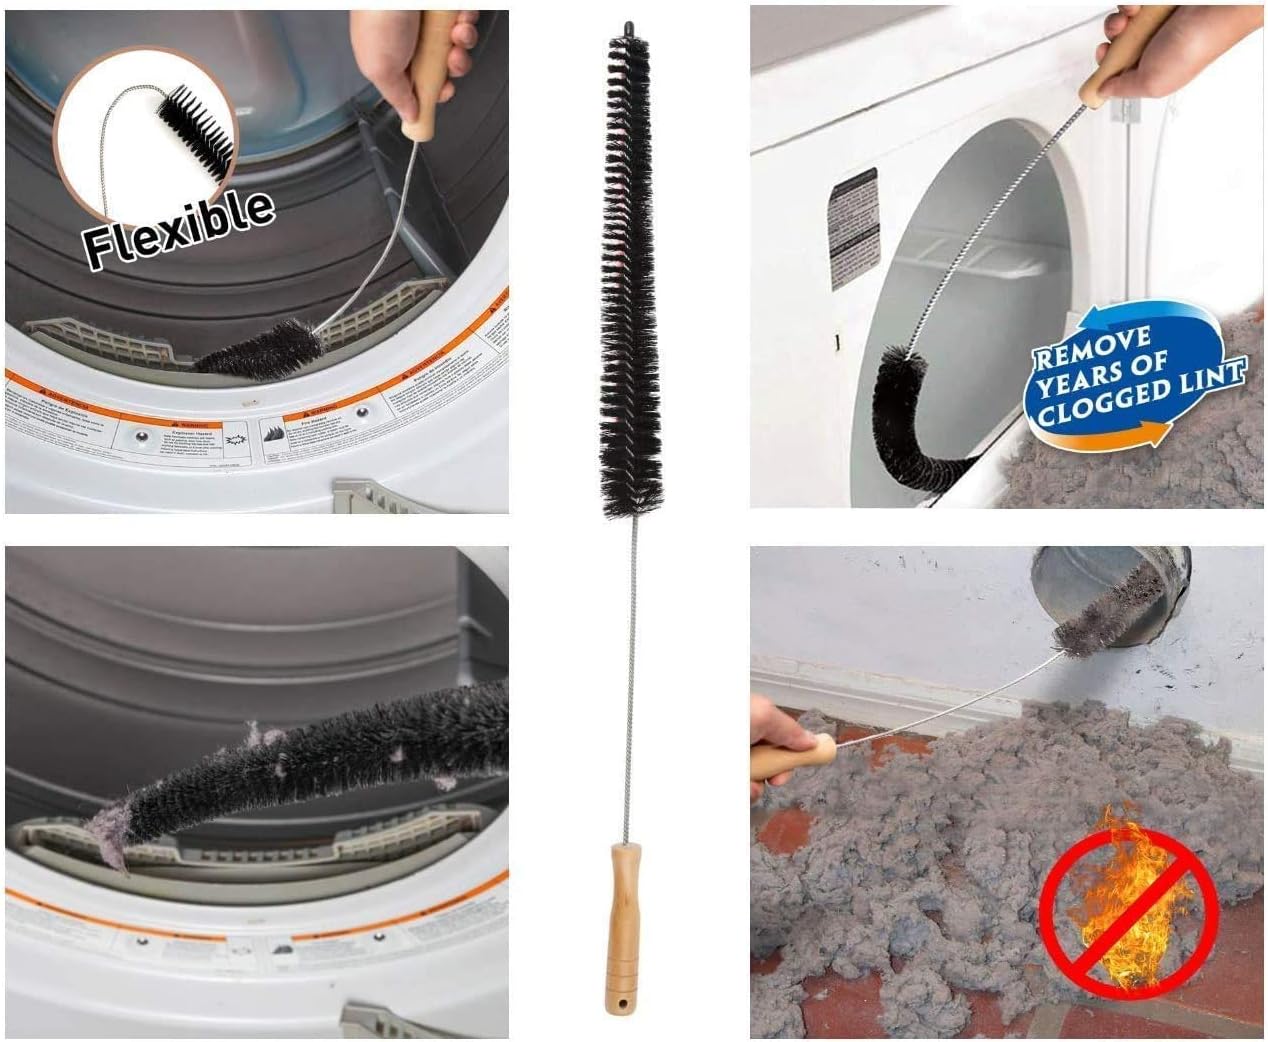 REFRIGERATOR CONDENSER COIL BRUSH • CLOTHES DRYER VENT LINT TRAP